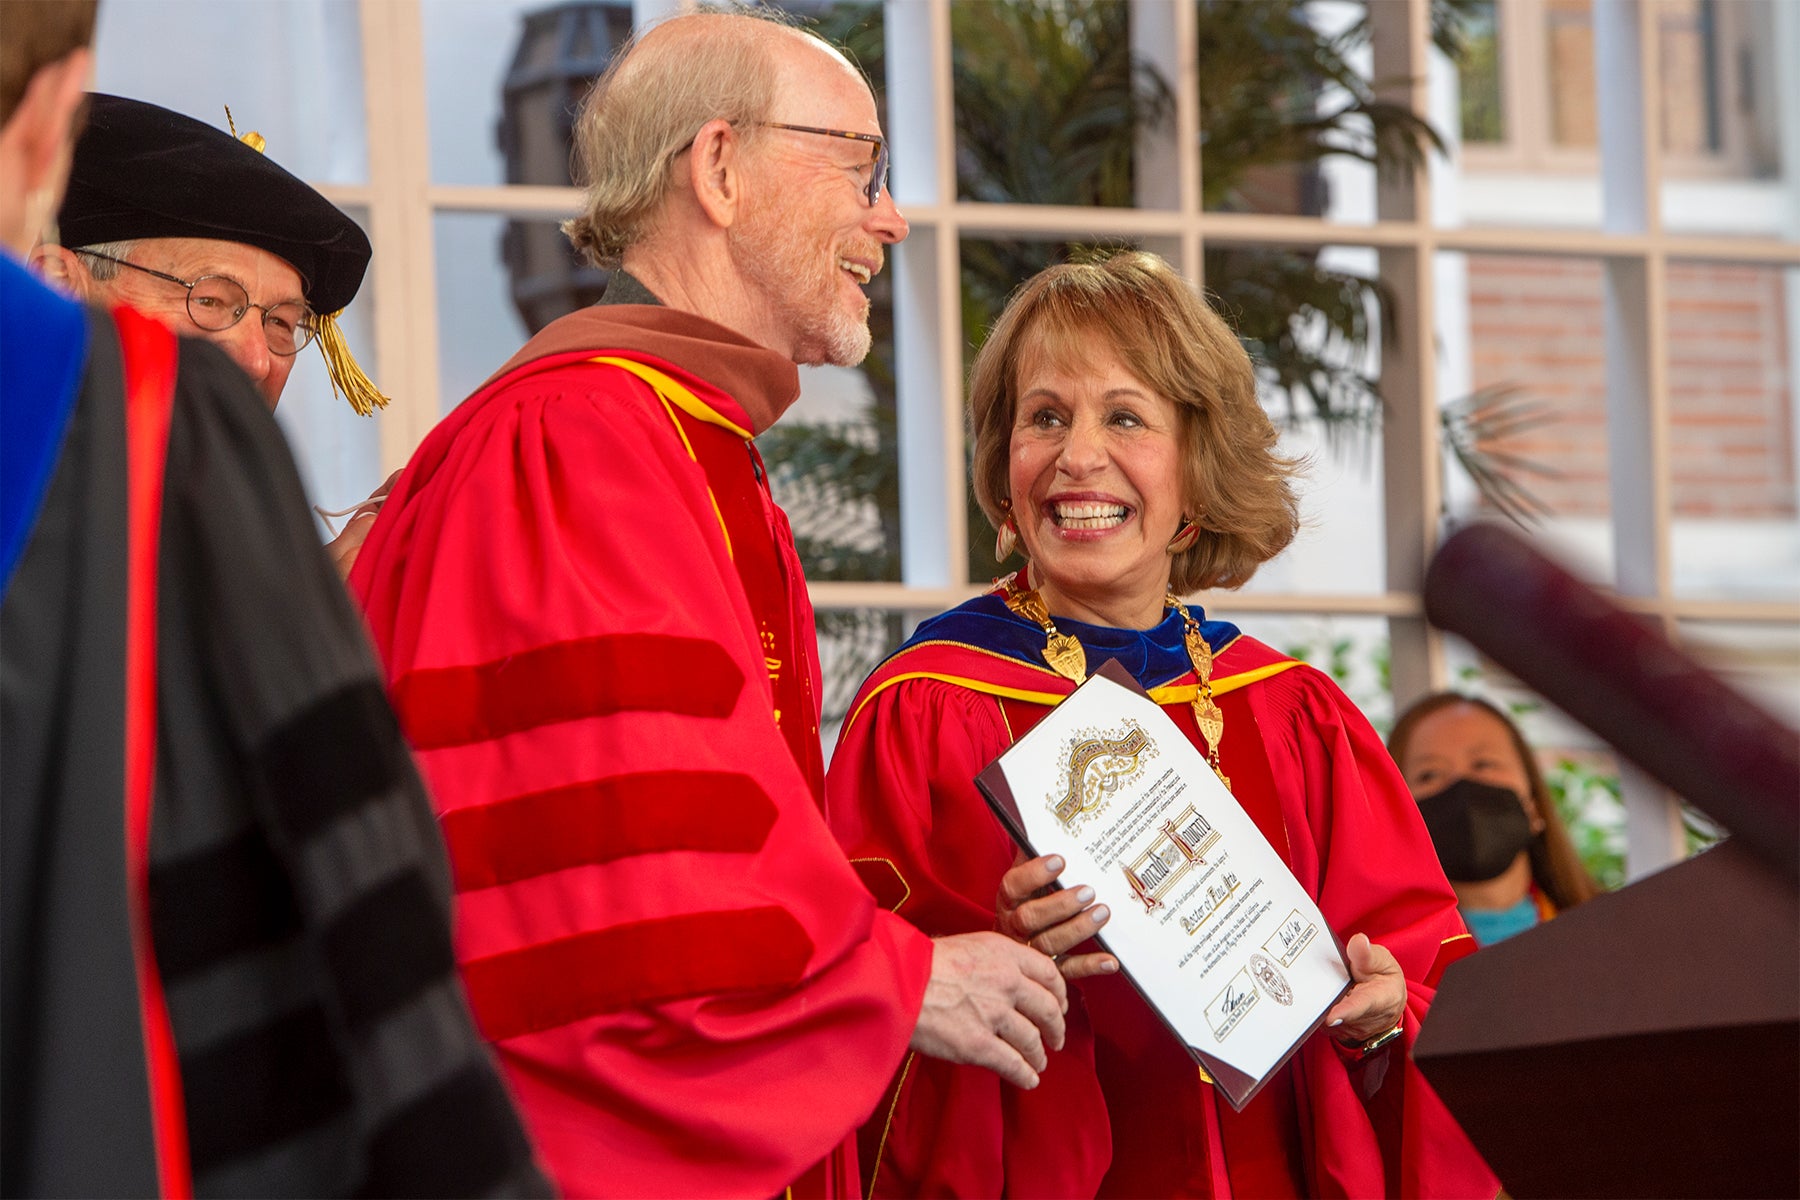 USC 2022 commencement: Carol L. Folt and Ron Howard